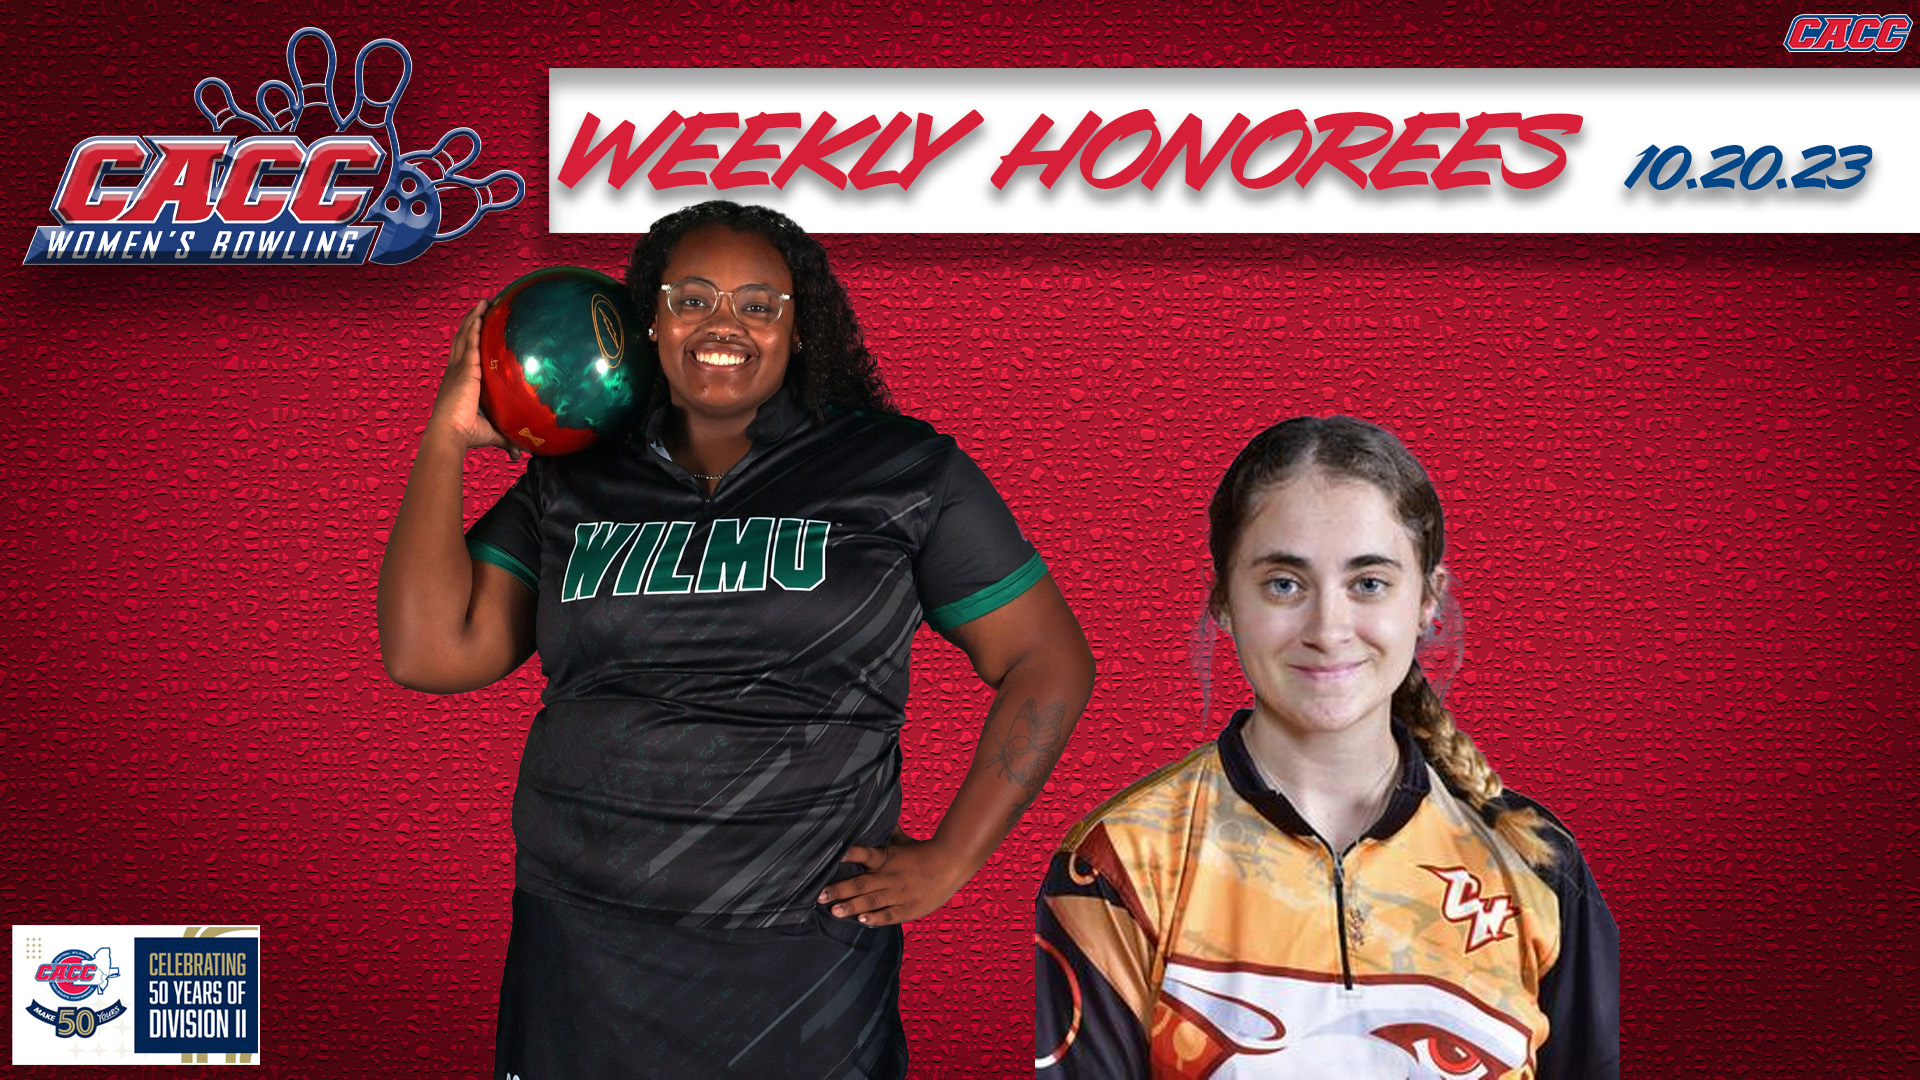 CACC Women's Bowling Weekly Honorees (10-20-23)